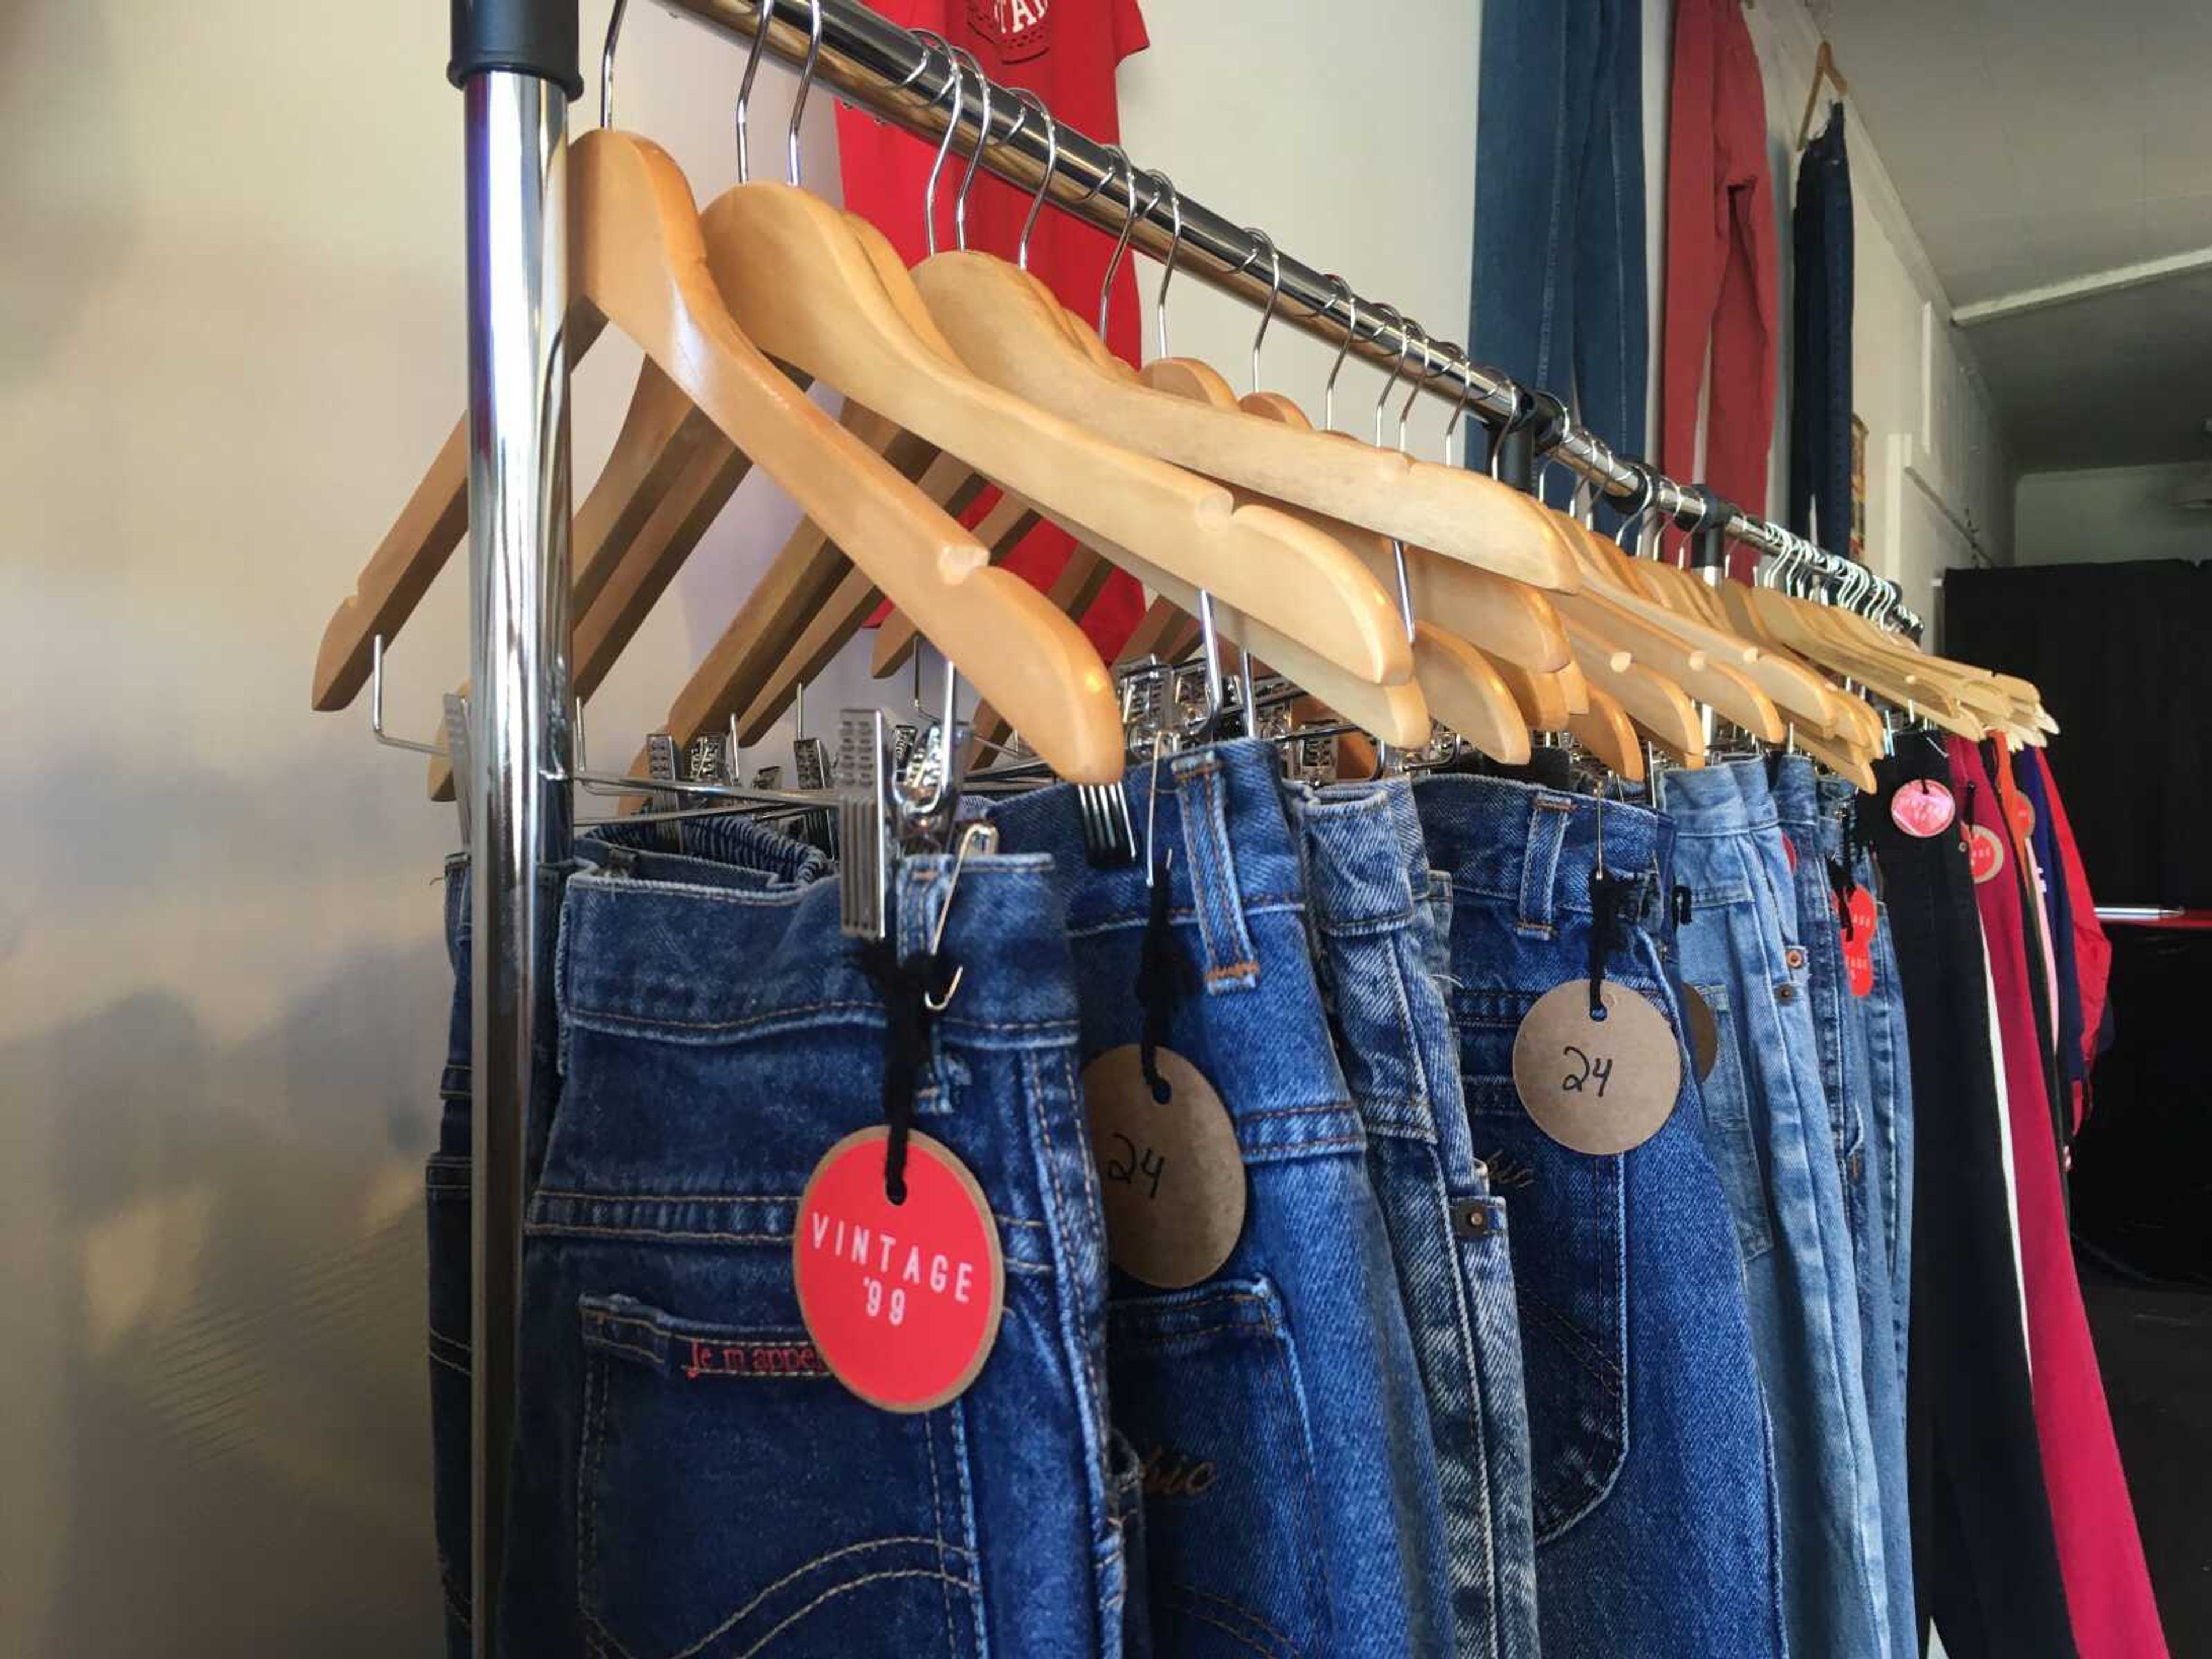 A clothing rack at Vintage '99 displays the store's denim collection, which is sourced secondhand from sellers across the country.